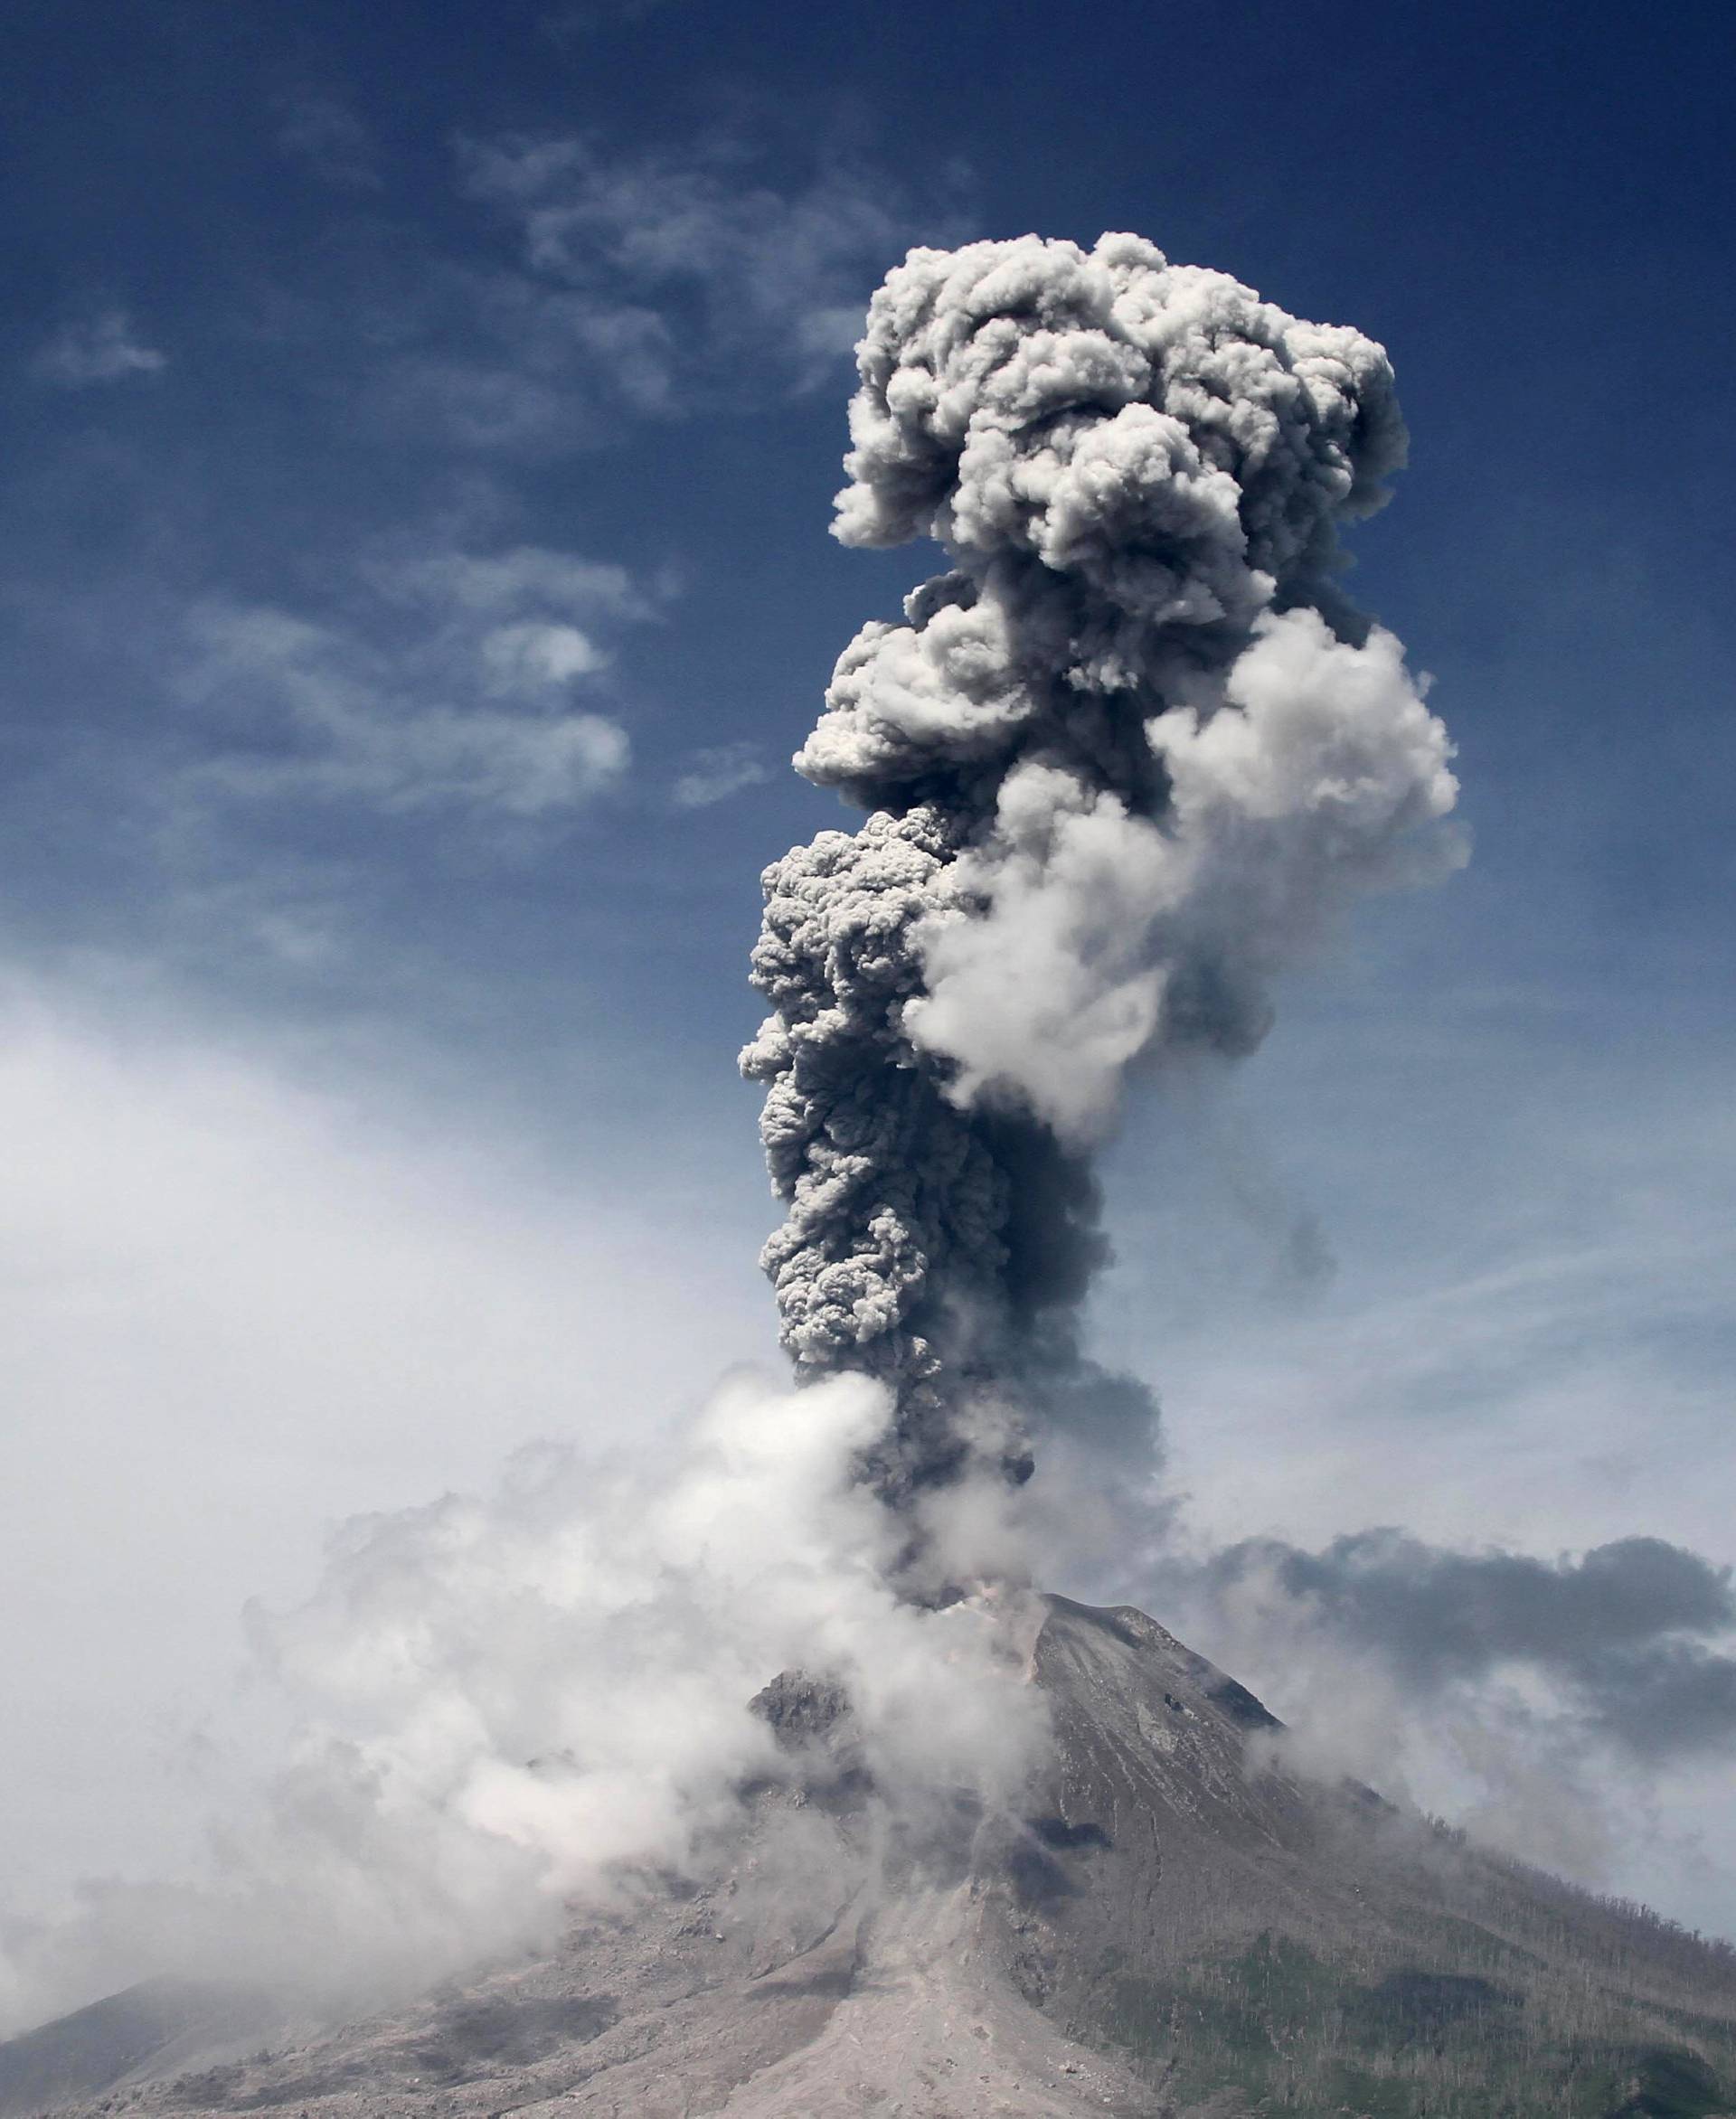 Mount Sinabung volcano, active since 2010, spews smoke and ash into the air during an eruption as seen from Sukandebi village, Karo, North Sumatra